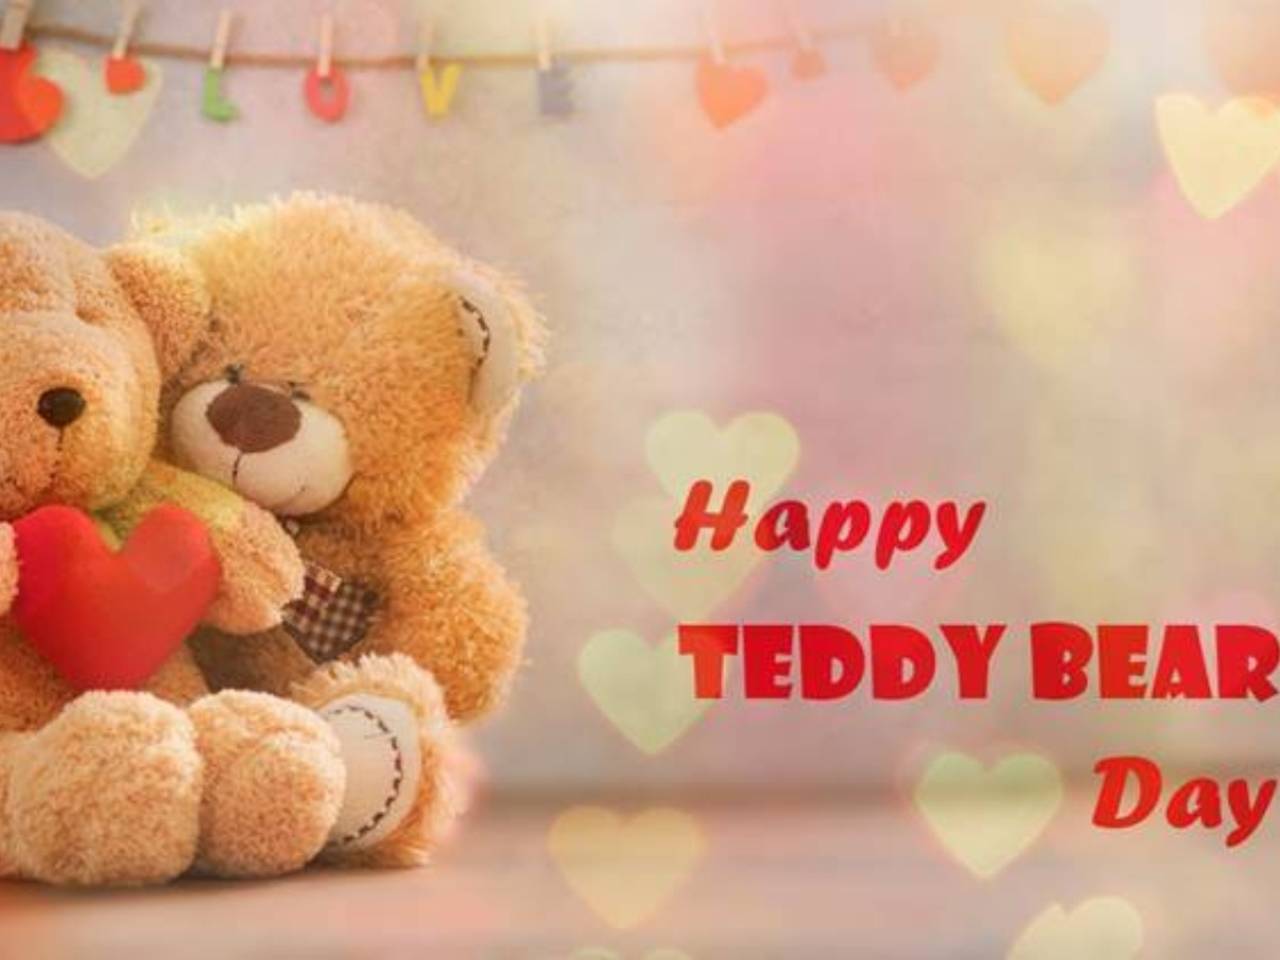 Happy Teddy Day 2021 Images, Quotes, Wishes, Messages, Cards, Greetings, and GIFs pic